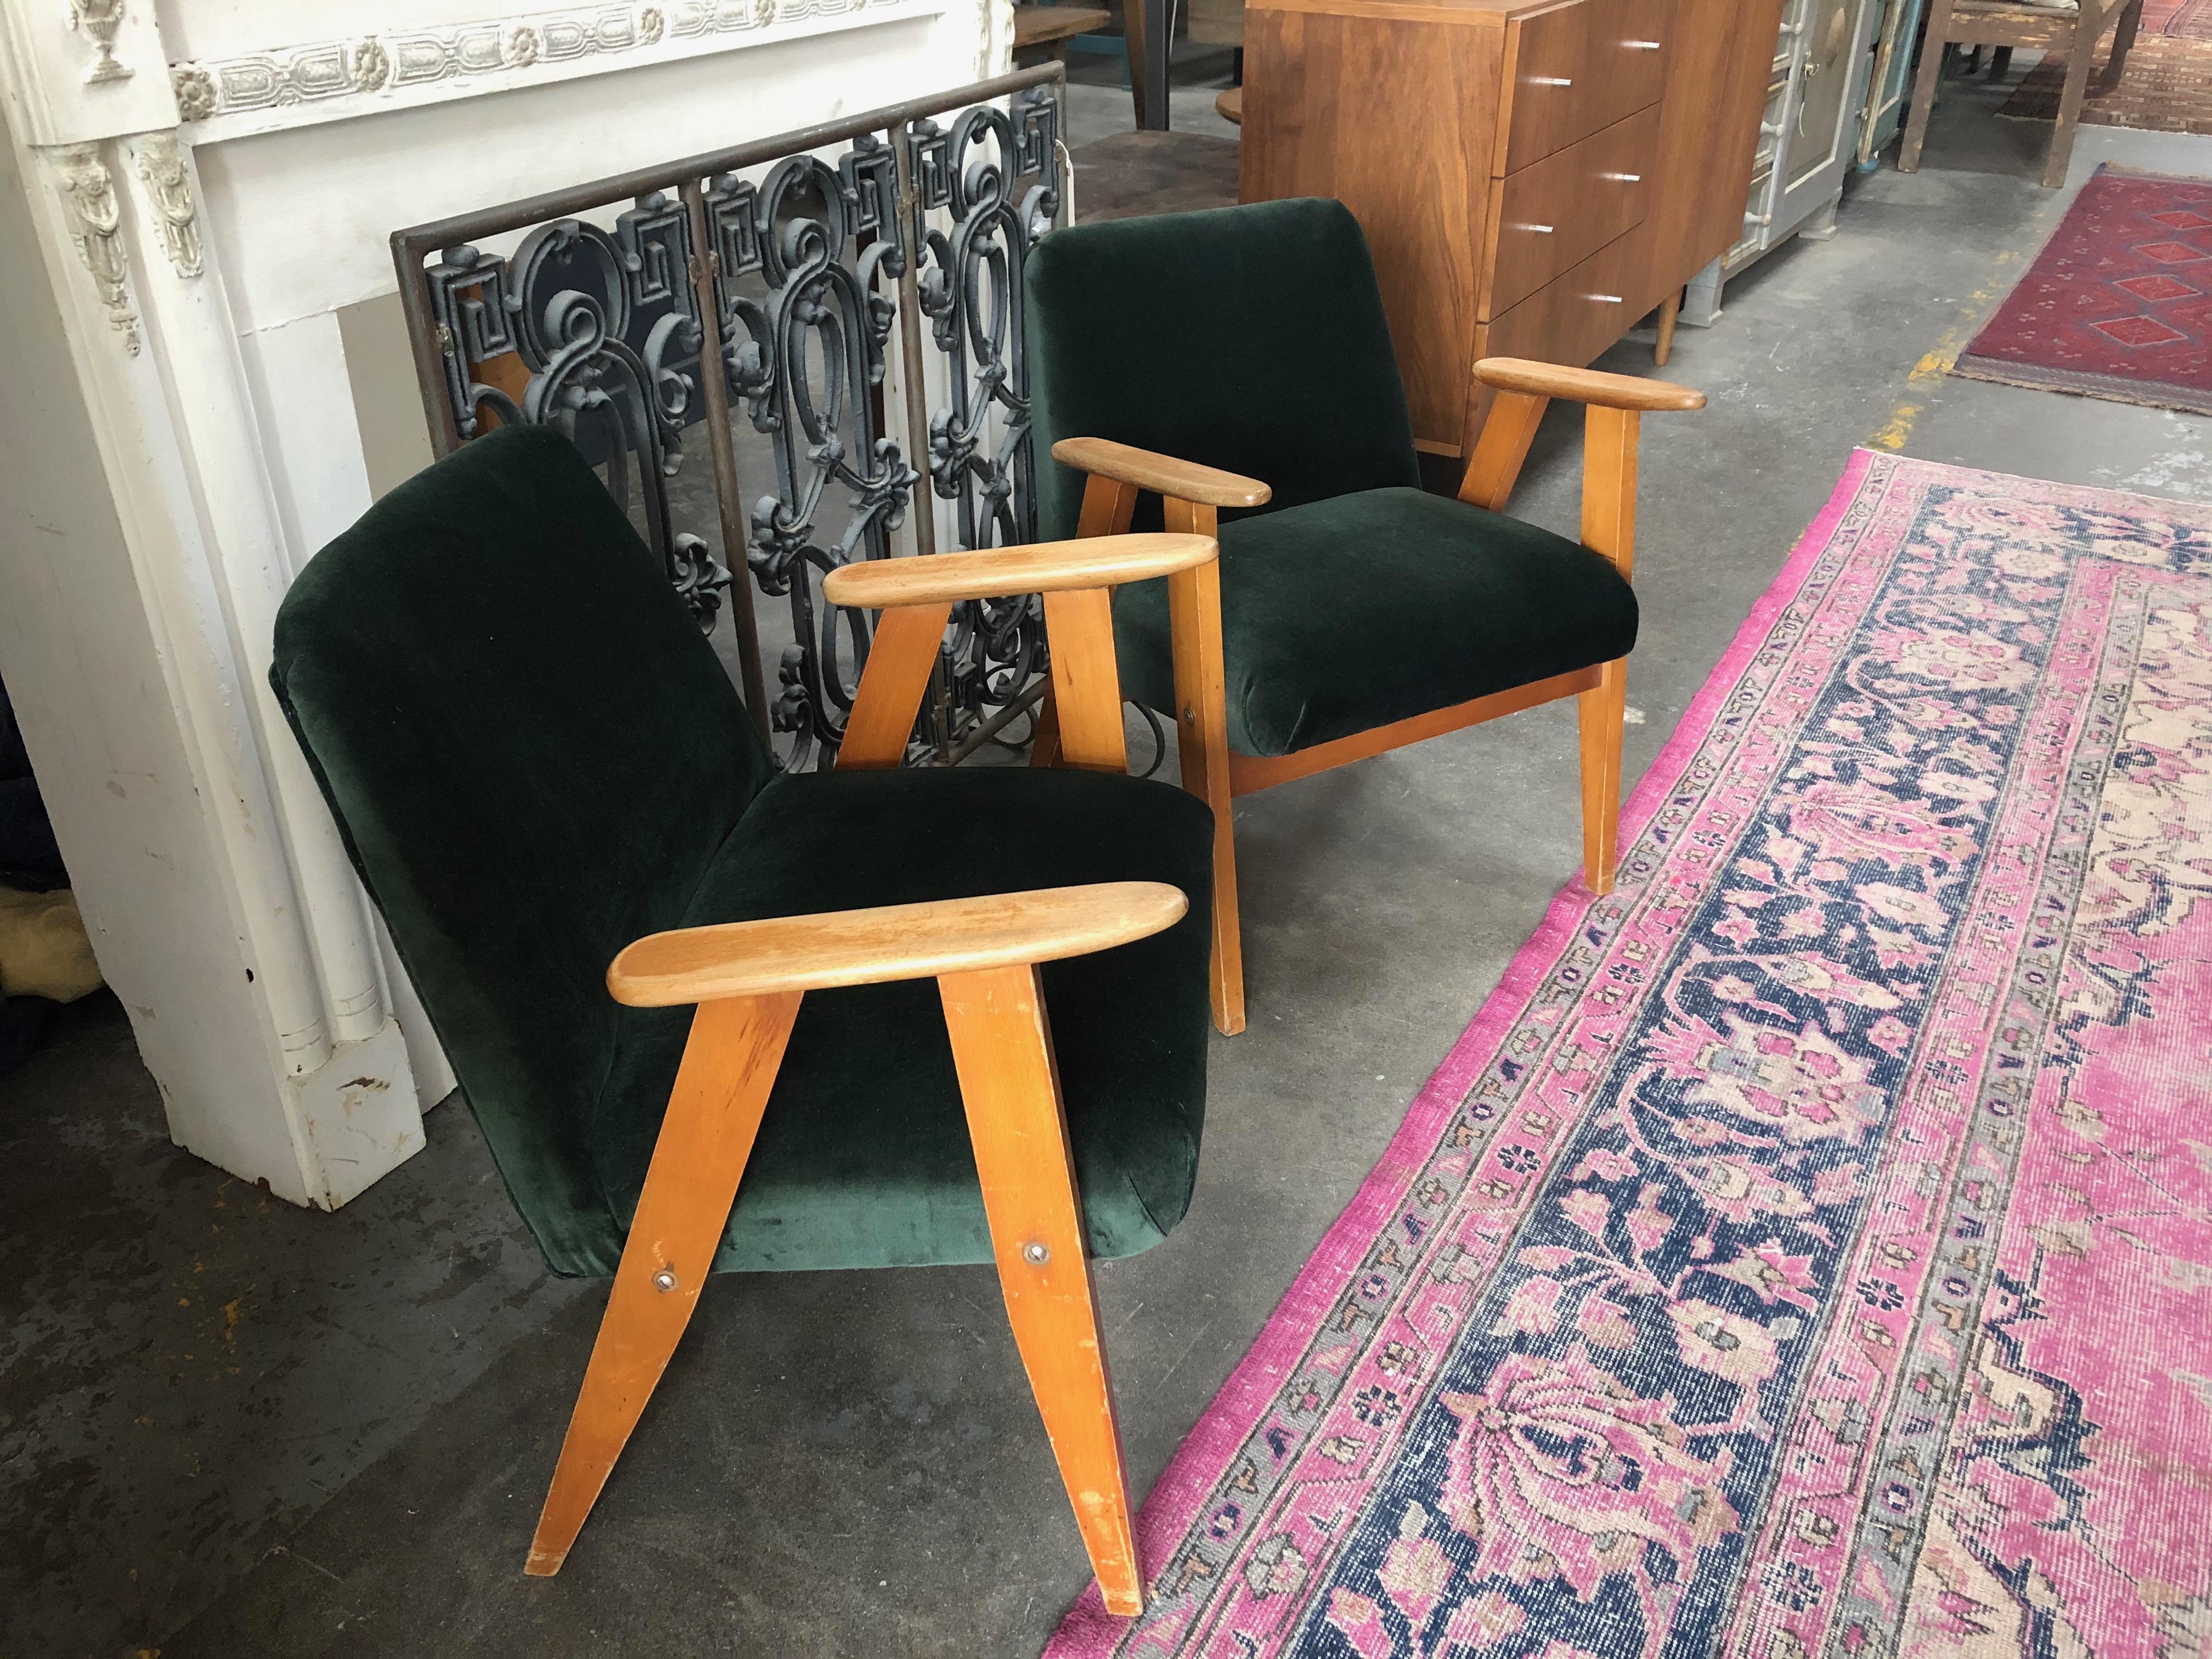 An elegant pair of reupholstered green velvet midcentury occasional chairs featuring a wooden frame and rounded arm rests. 

Dimensions: 27